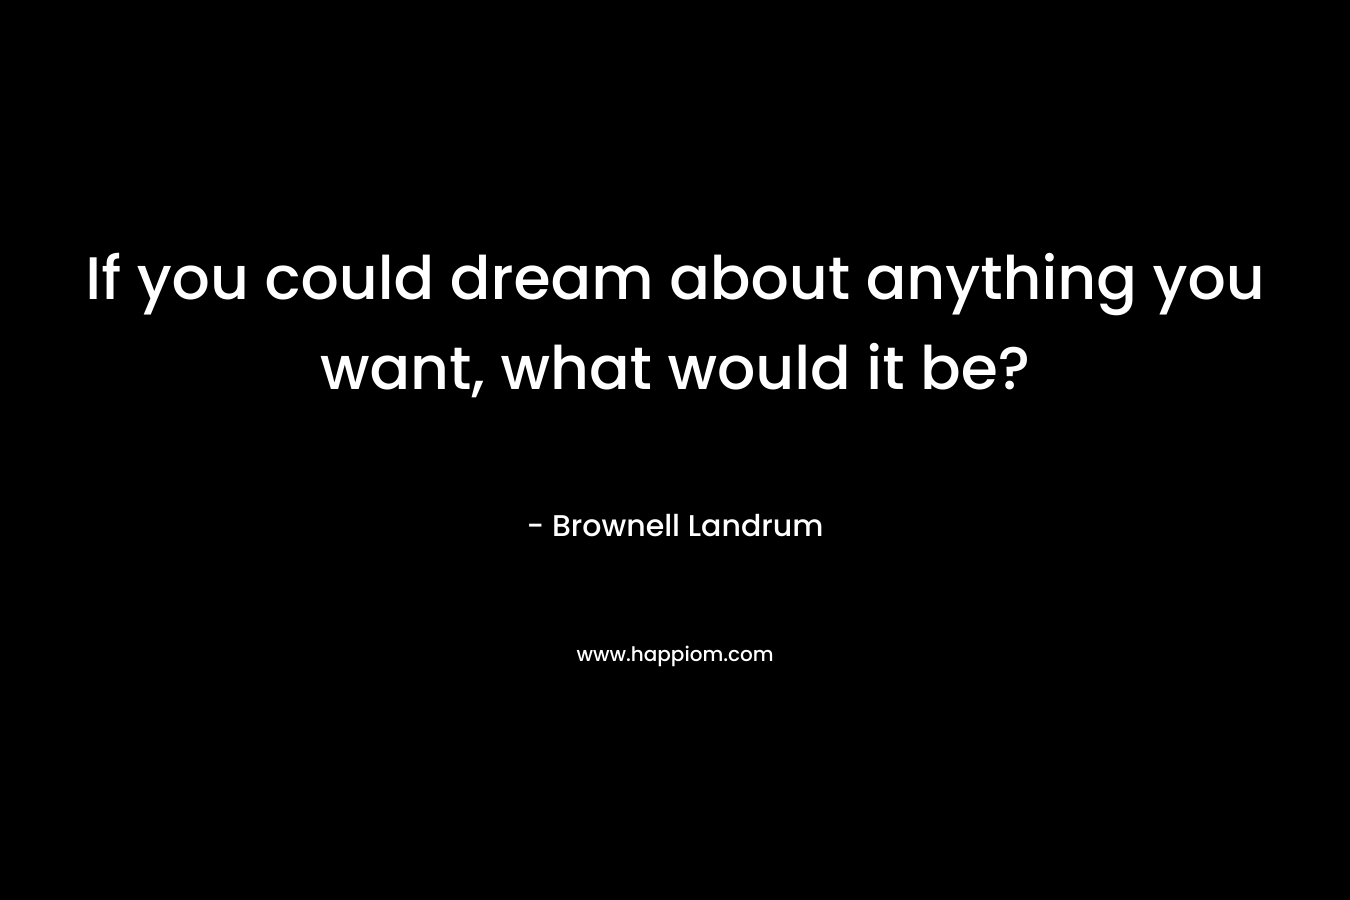 If you could dream about anything you want, what would it be?